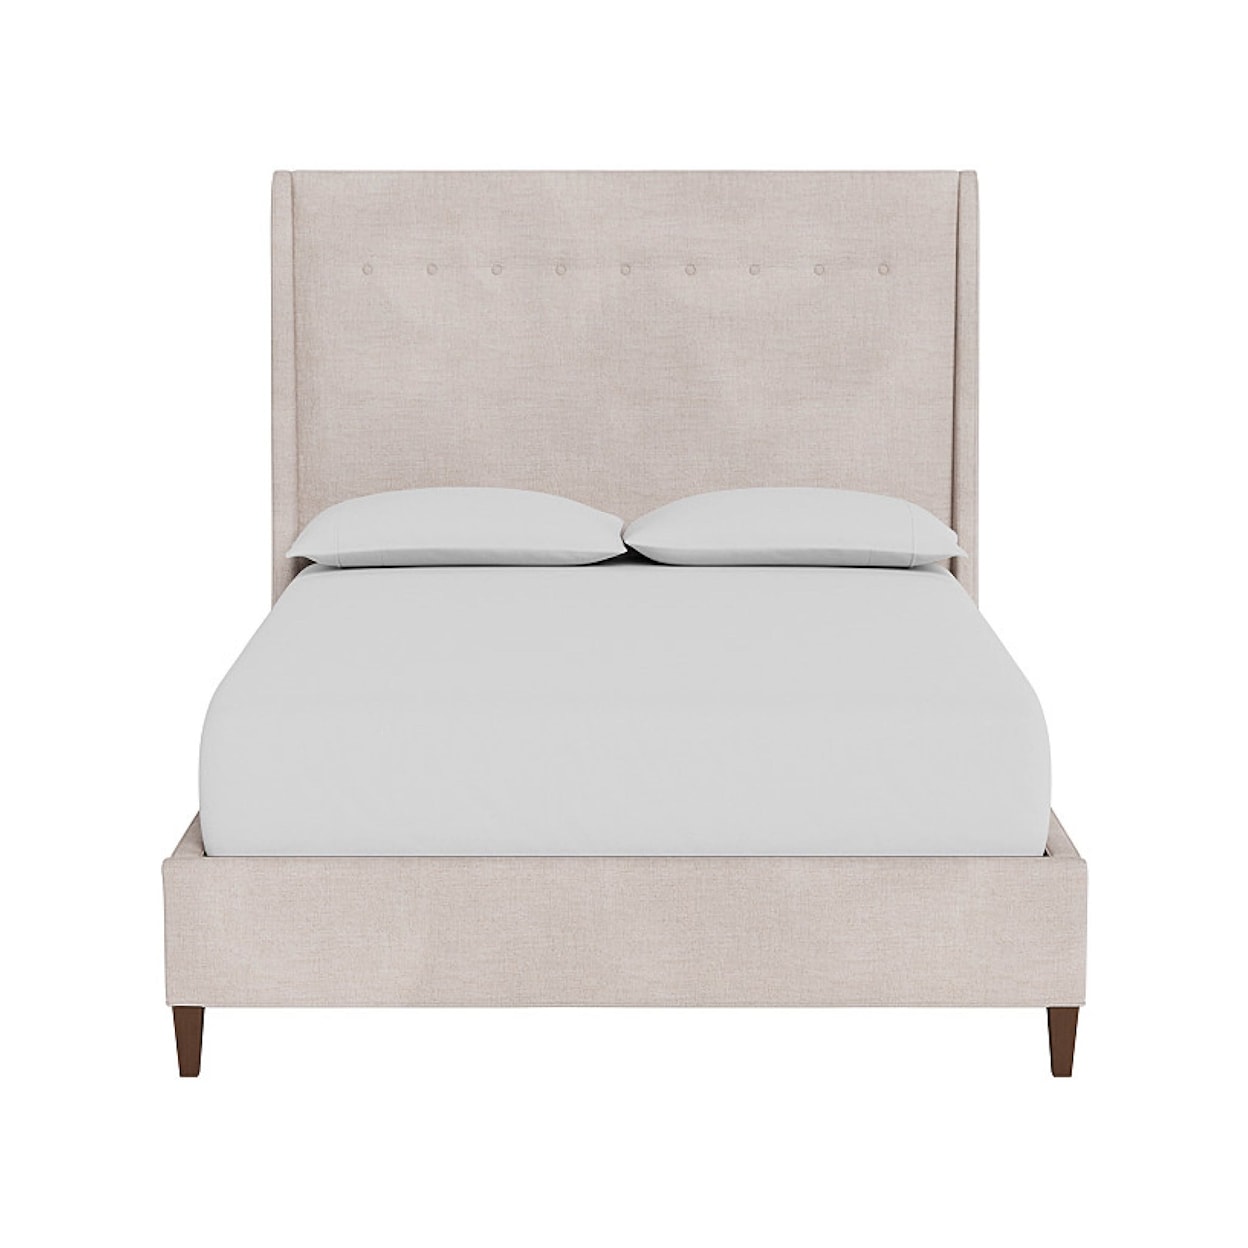 Universal Special Order King Midtown Bed